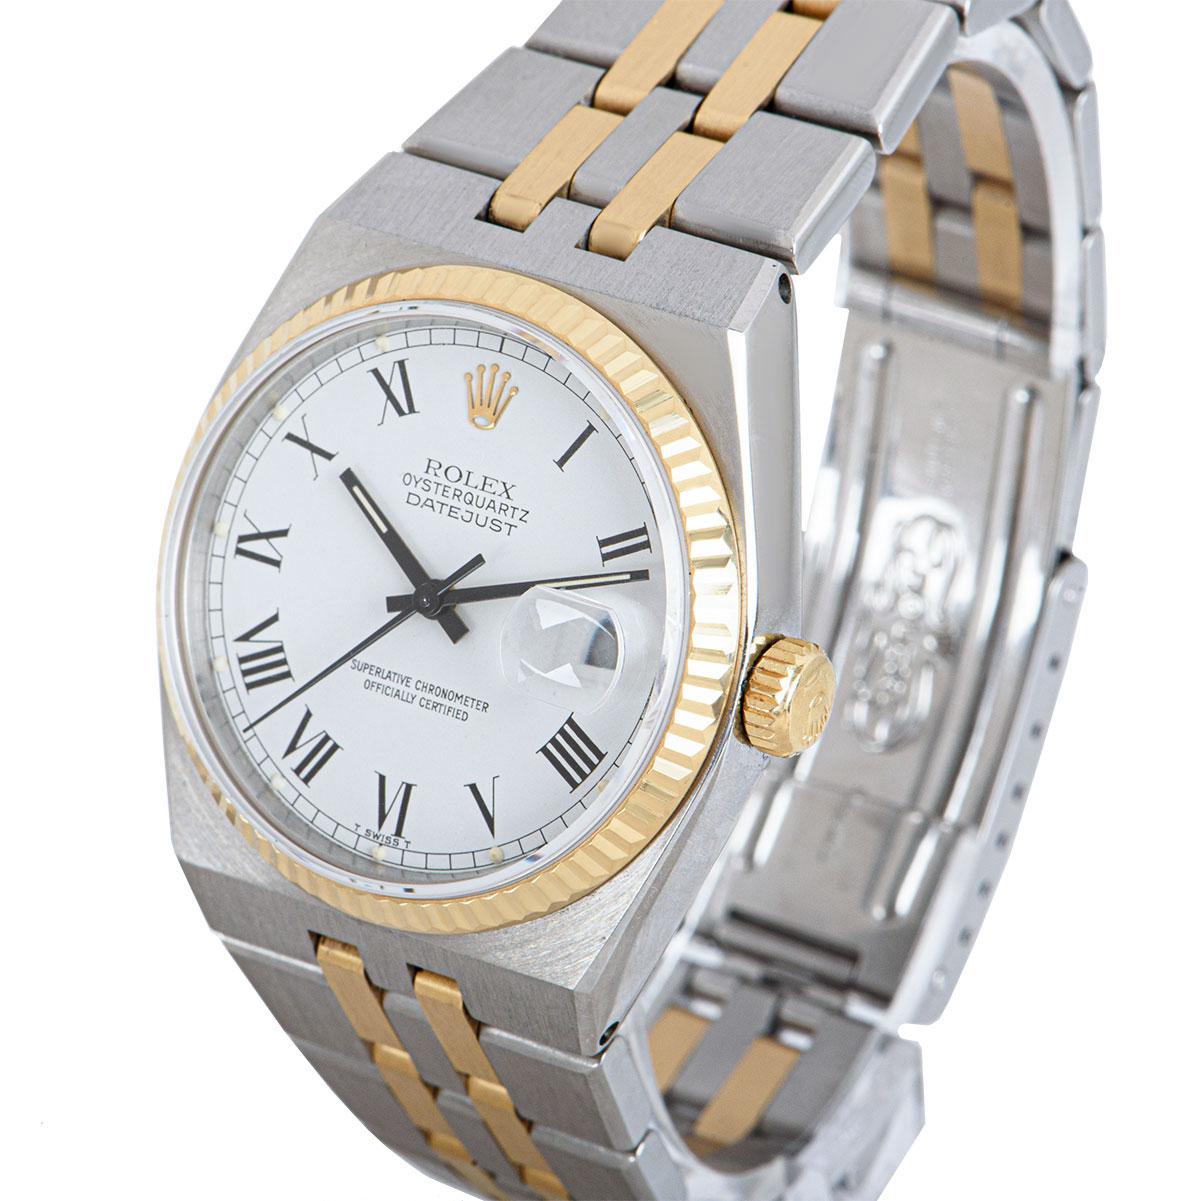 A 36 mm Stainless Steel and 18k Yellow Gold Oysterquartz Datejust Gents Wristwatch, white dial with roman numerals, date at 3 0'clock, a fixed 18k yellow gold fluted bezel, a stainless steel and 18k yellow gold oysterquartz bracelet with a stainless